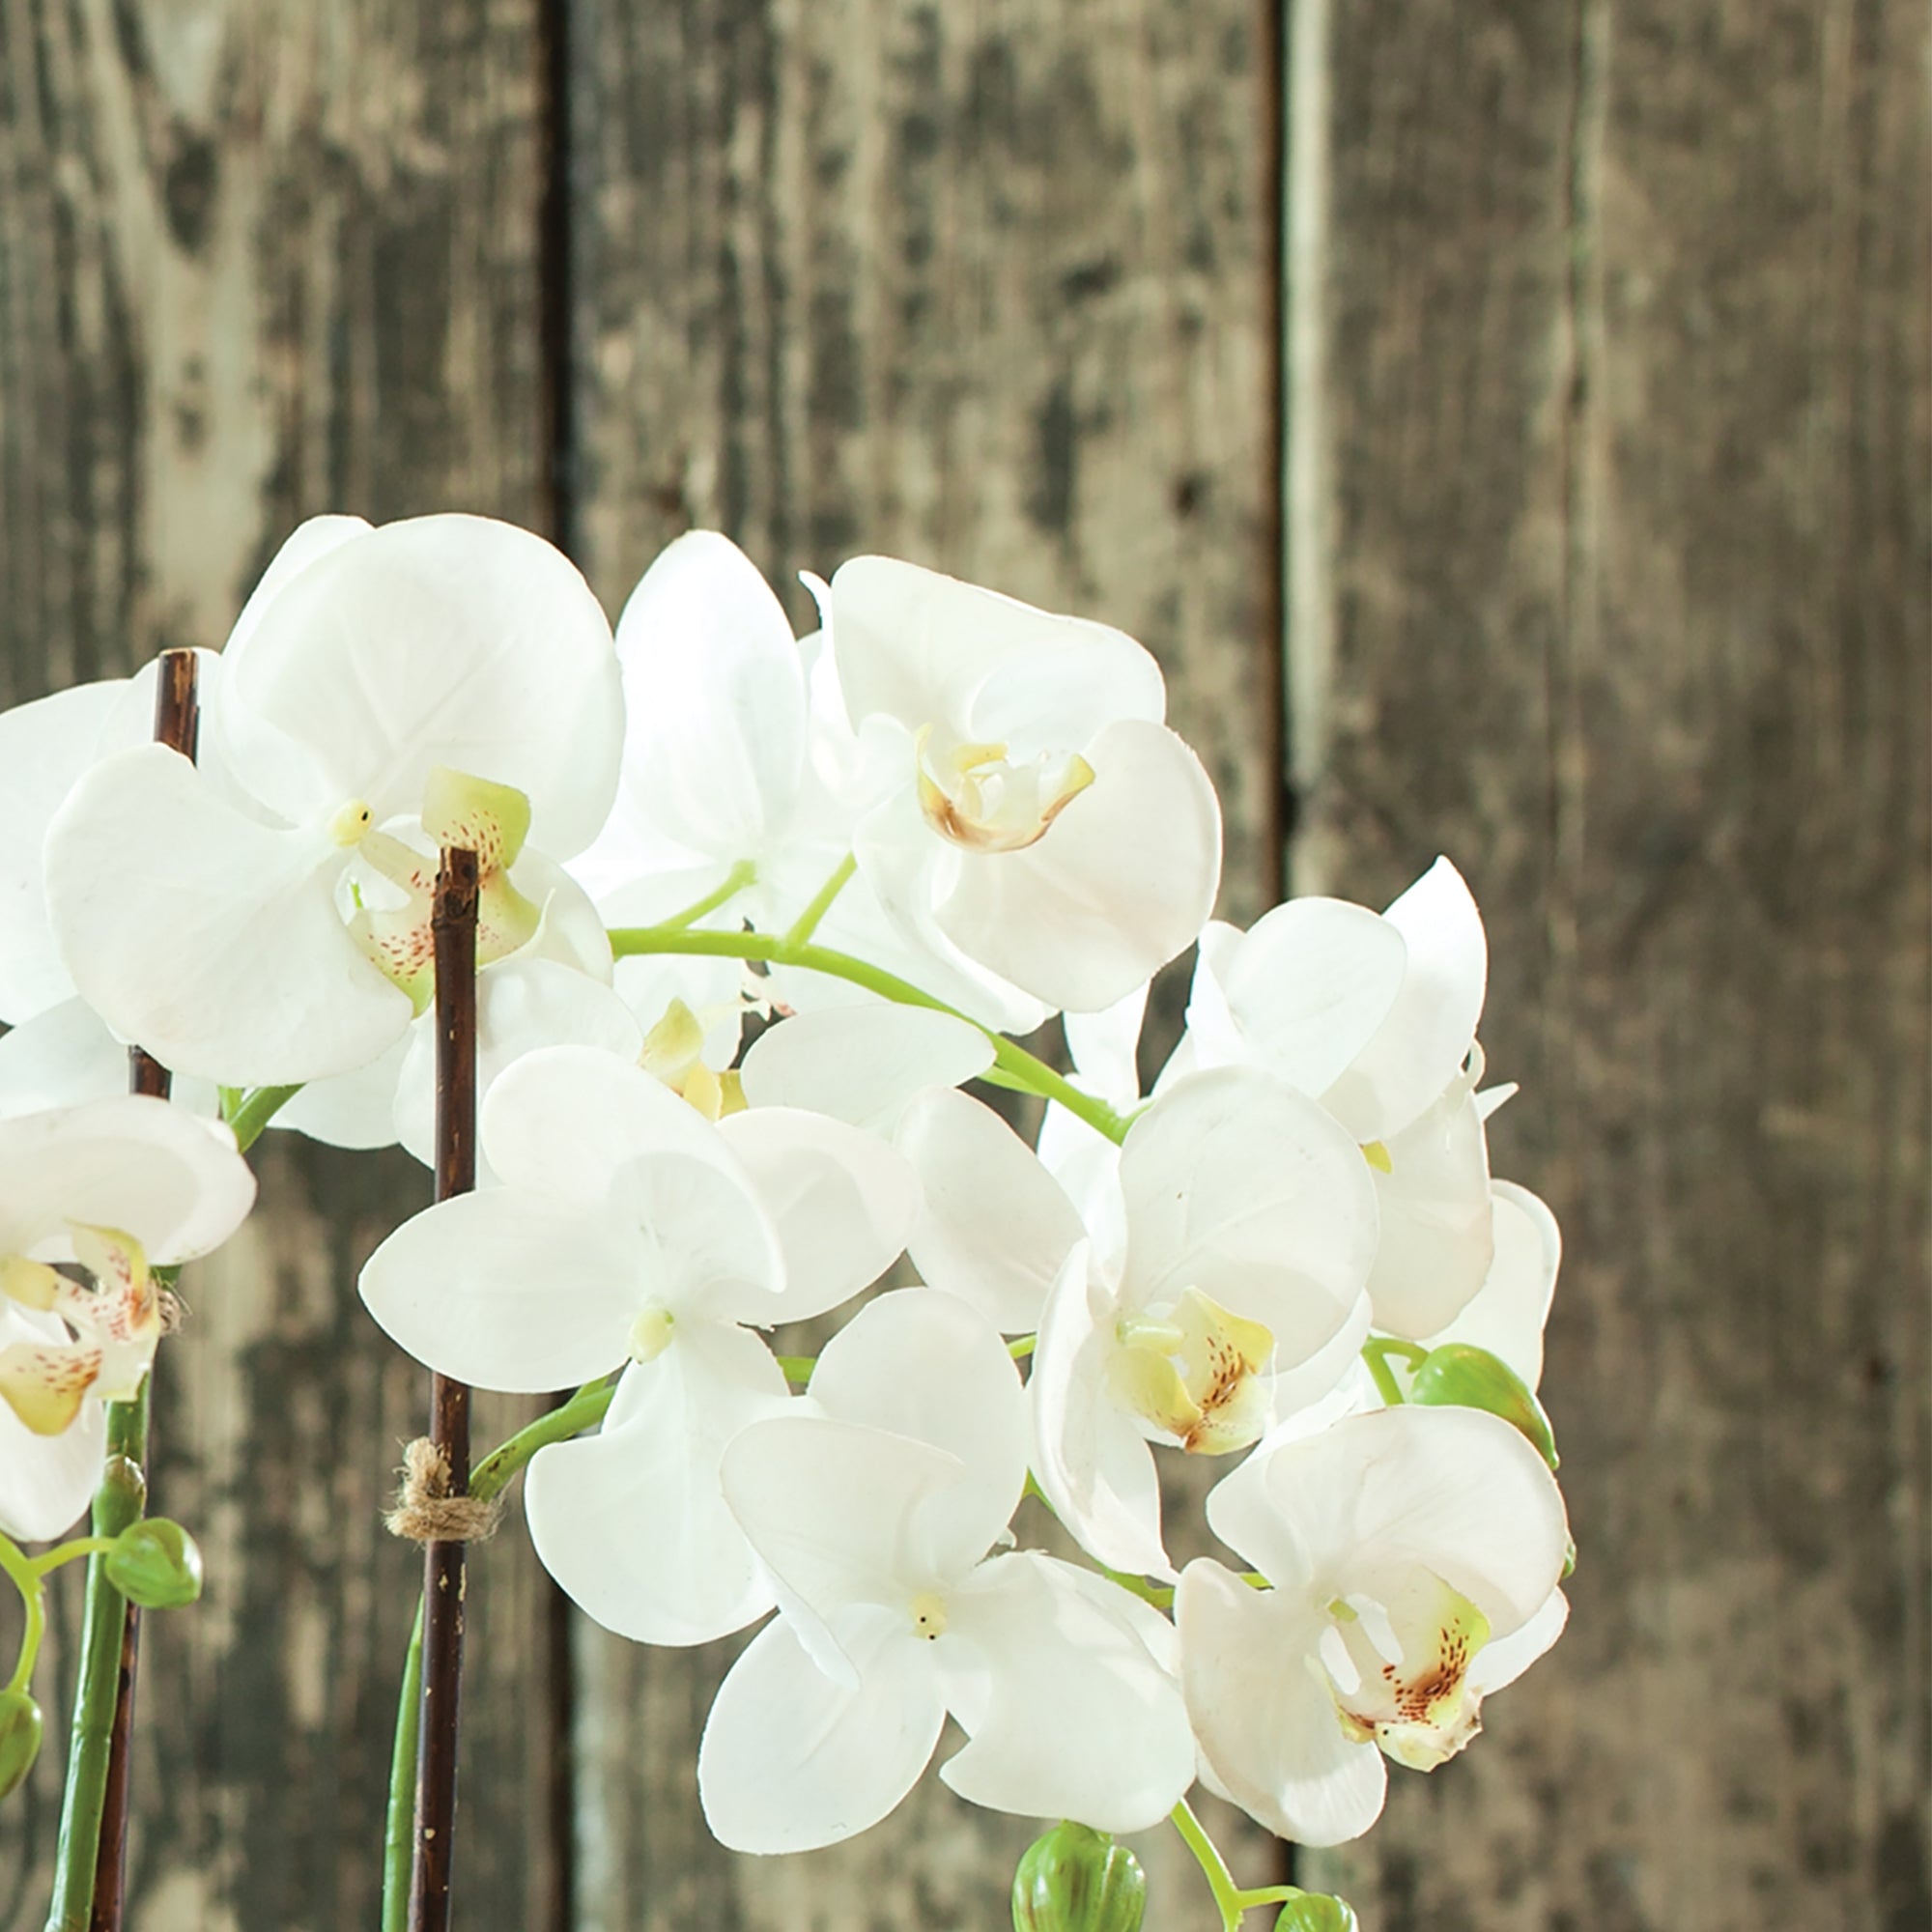 Our Phalaenopsis is totally realistic. A perfect copy of nature. You'd need a botanist to tell the difference. Amethyst Home provides interior design, new construction, custom furniture, and area rugs in the Boston metro area.